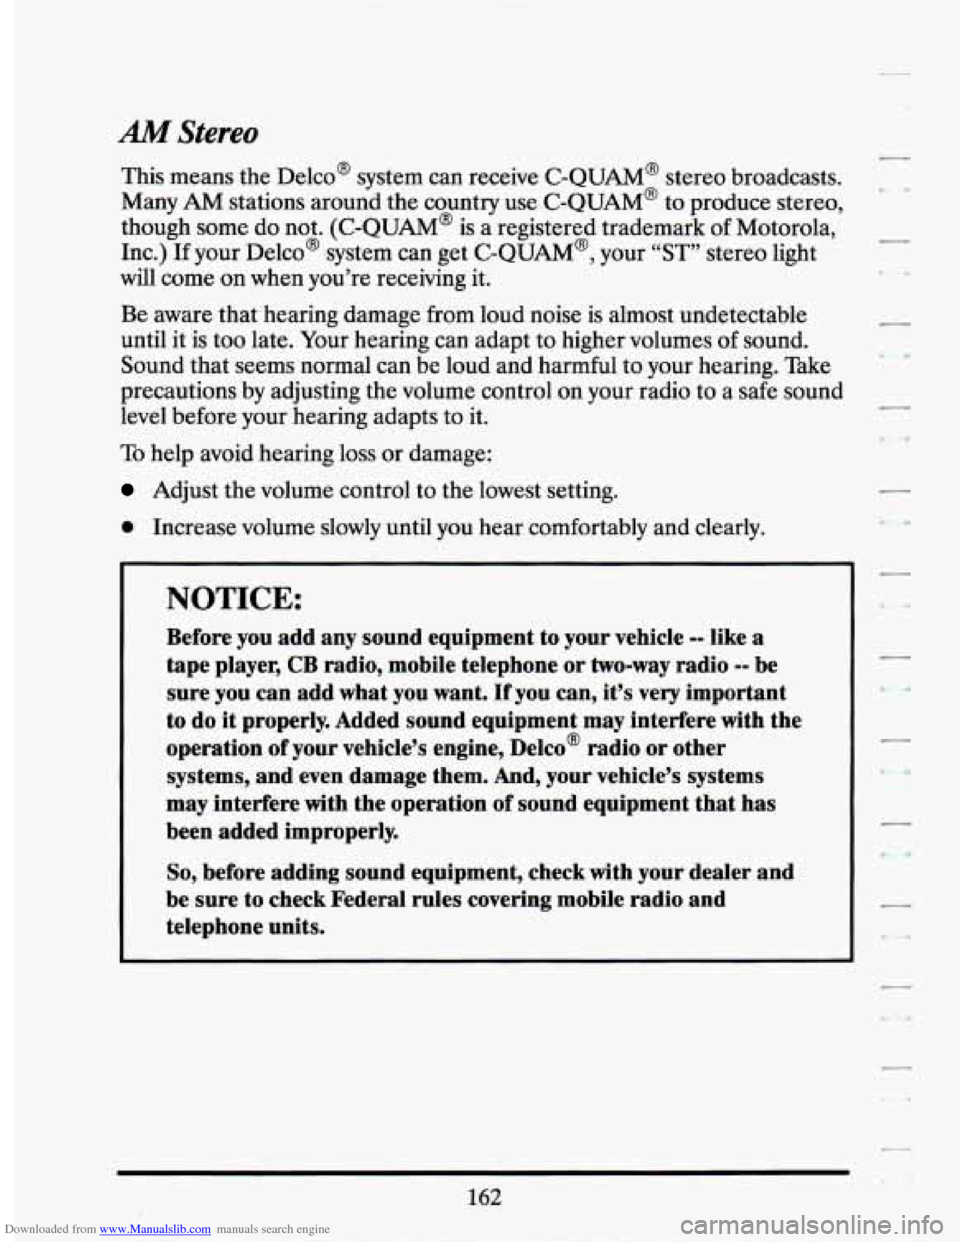 CADILLAC SEVILLE 1994 4.G Owners Manual Downloaded from www.Manualslib.com manuals search engine AM Stereo 
This means the Delco@  system  can  receive  C-QUAM@  stereo broadcasts. 
Many 
AM stations around  the country  use  C-QUAM@  to pr